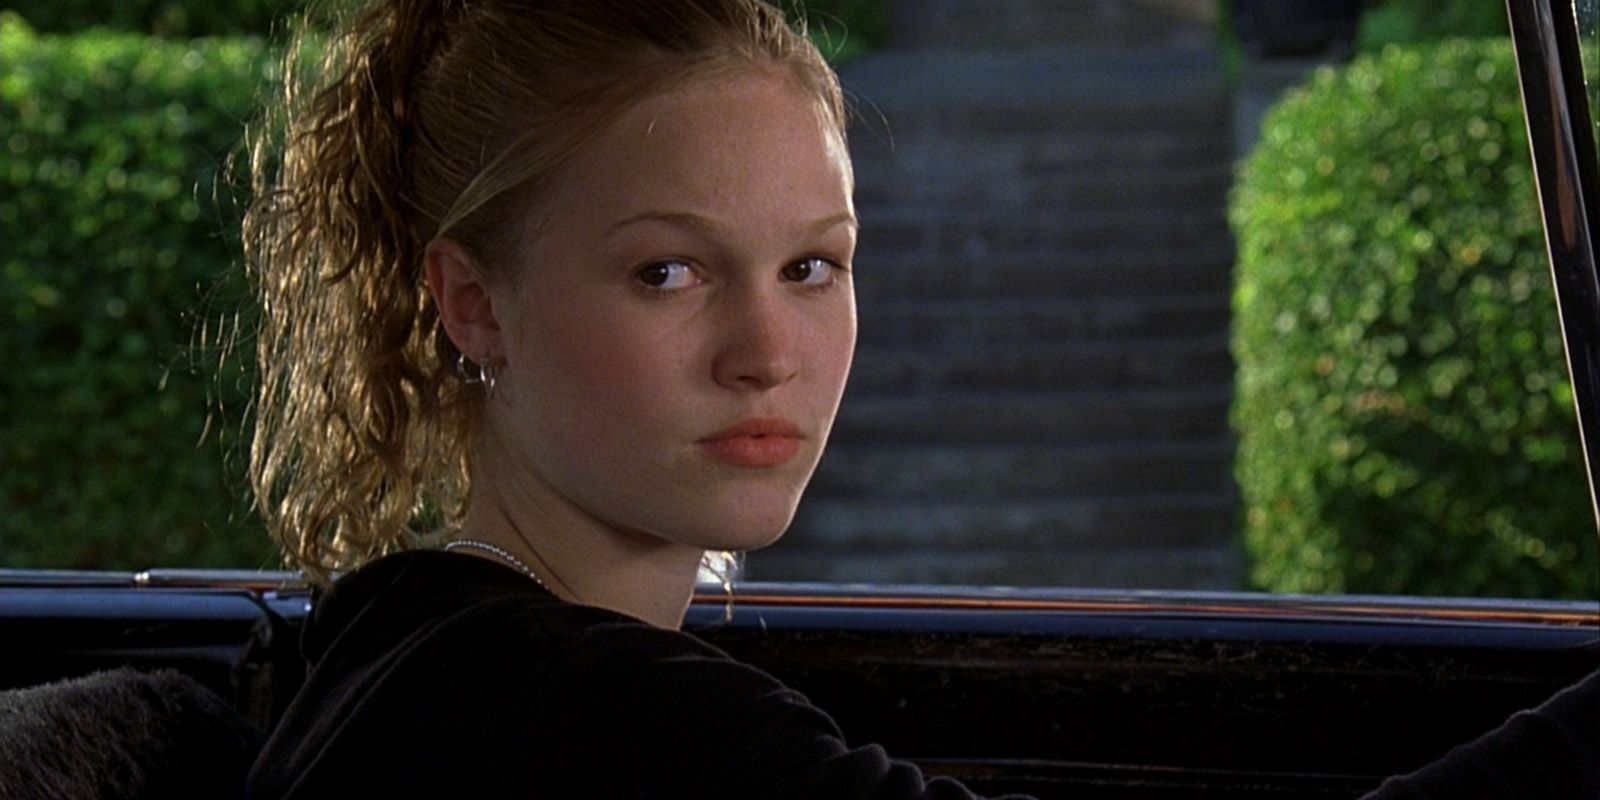 Kat looking serious in 10 Things I Hate About You